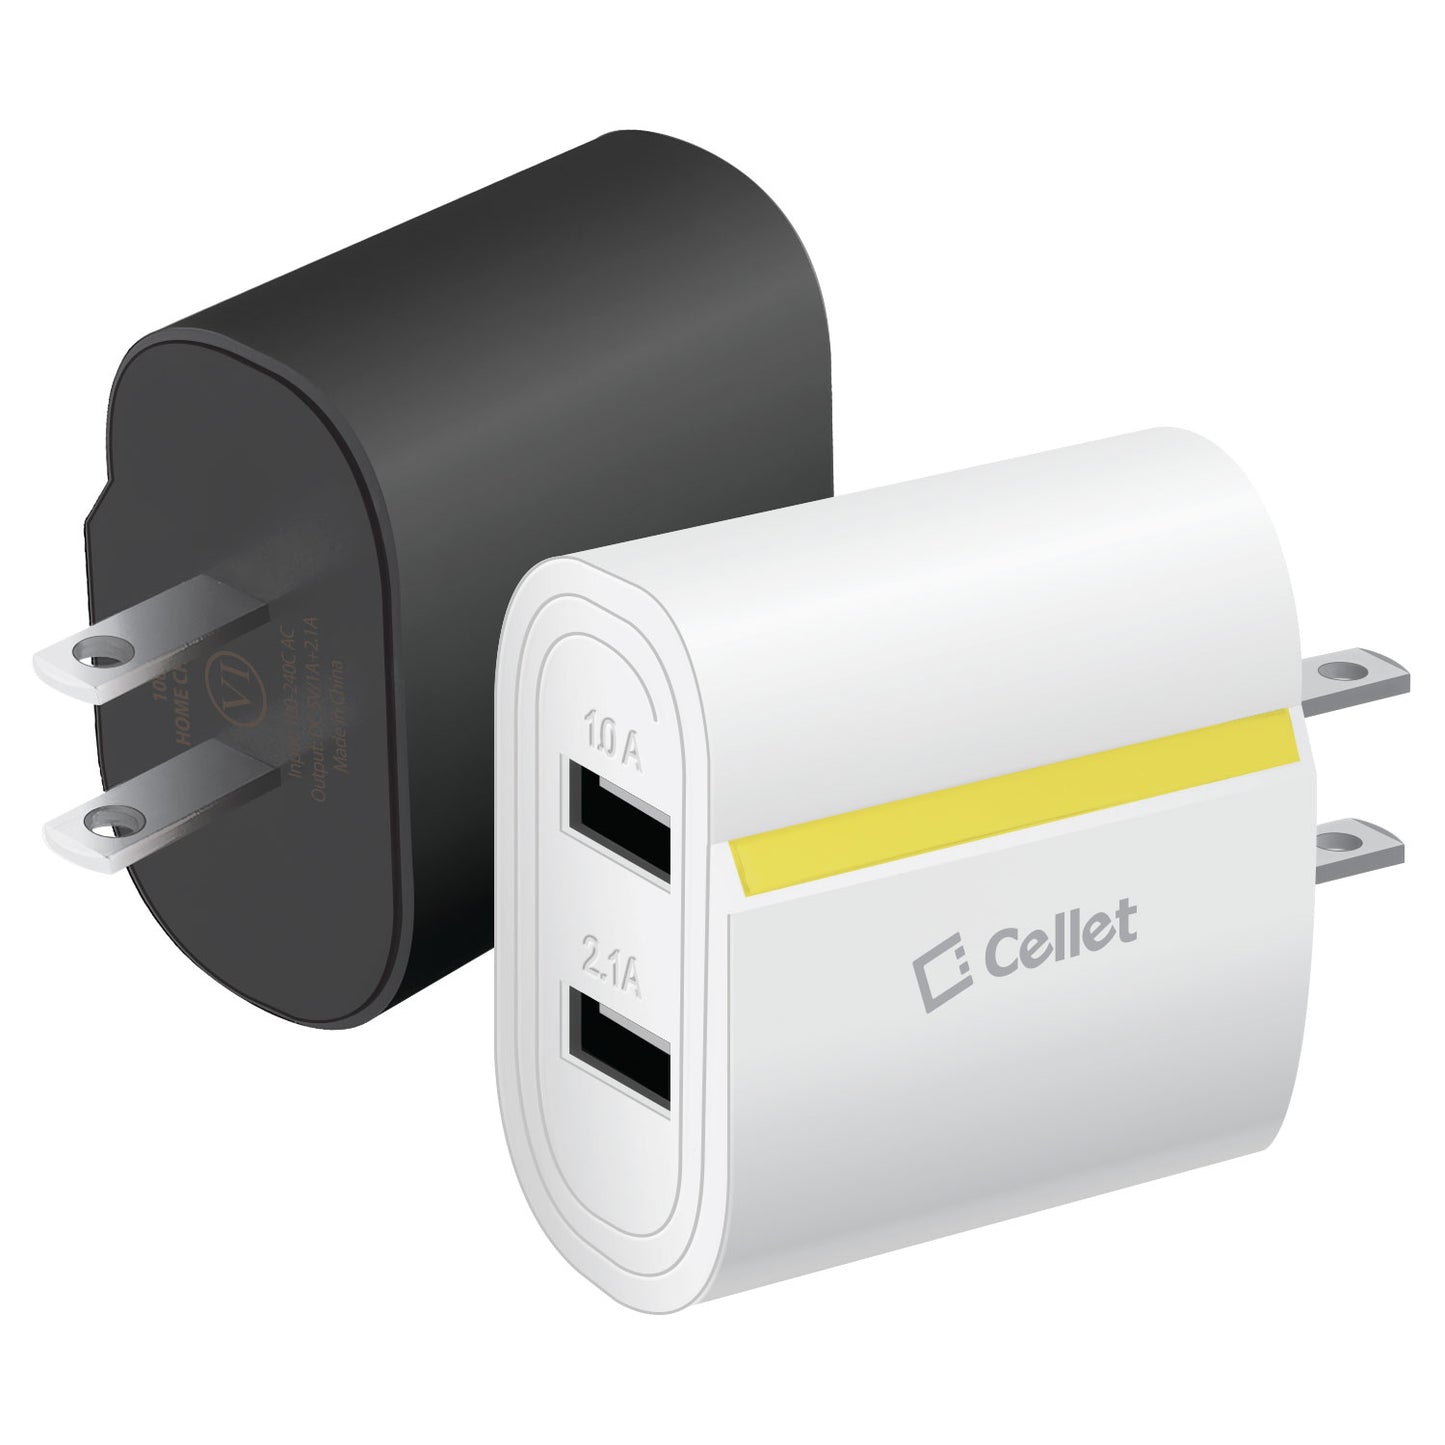 TANN230BK - Cellet Dual USB Home Charger, 2.1 Amp / 10 Watt Wall Charger for Apple iPhone X, iPad Mini, Galaxy Note 8 - Cable Sold Separately